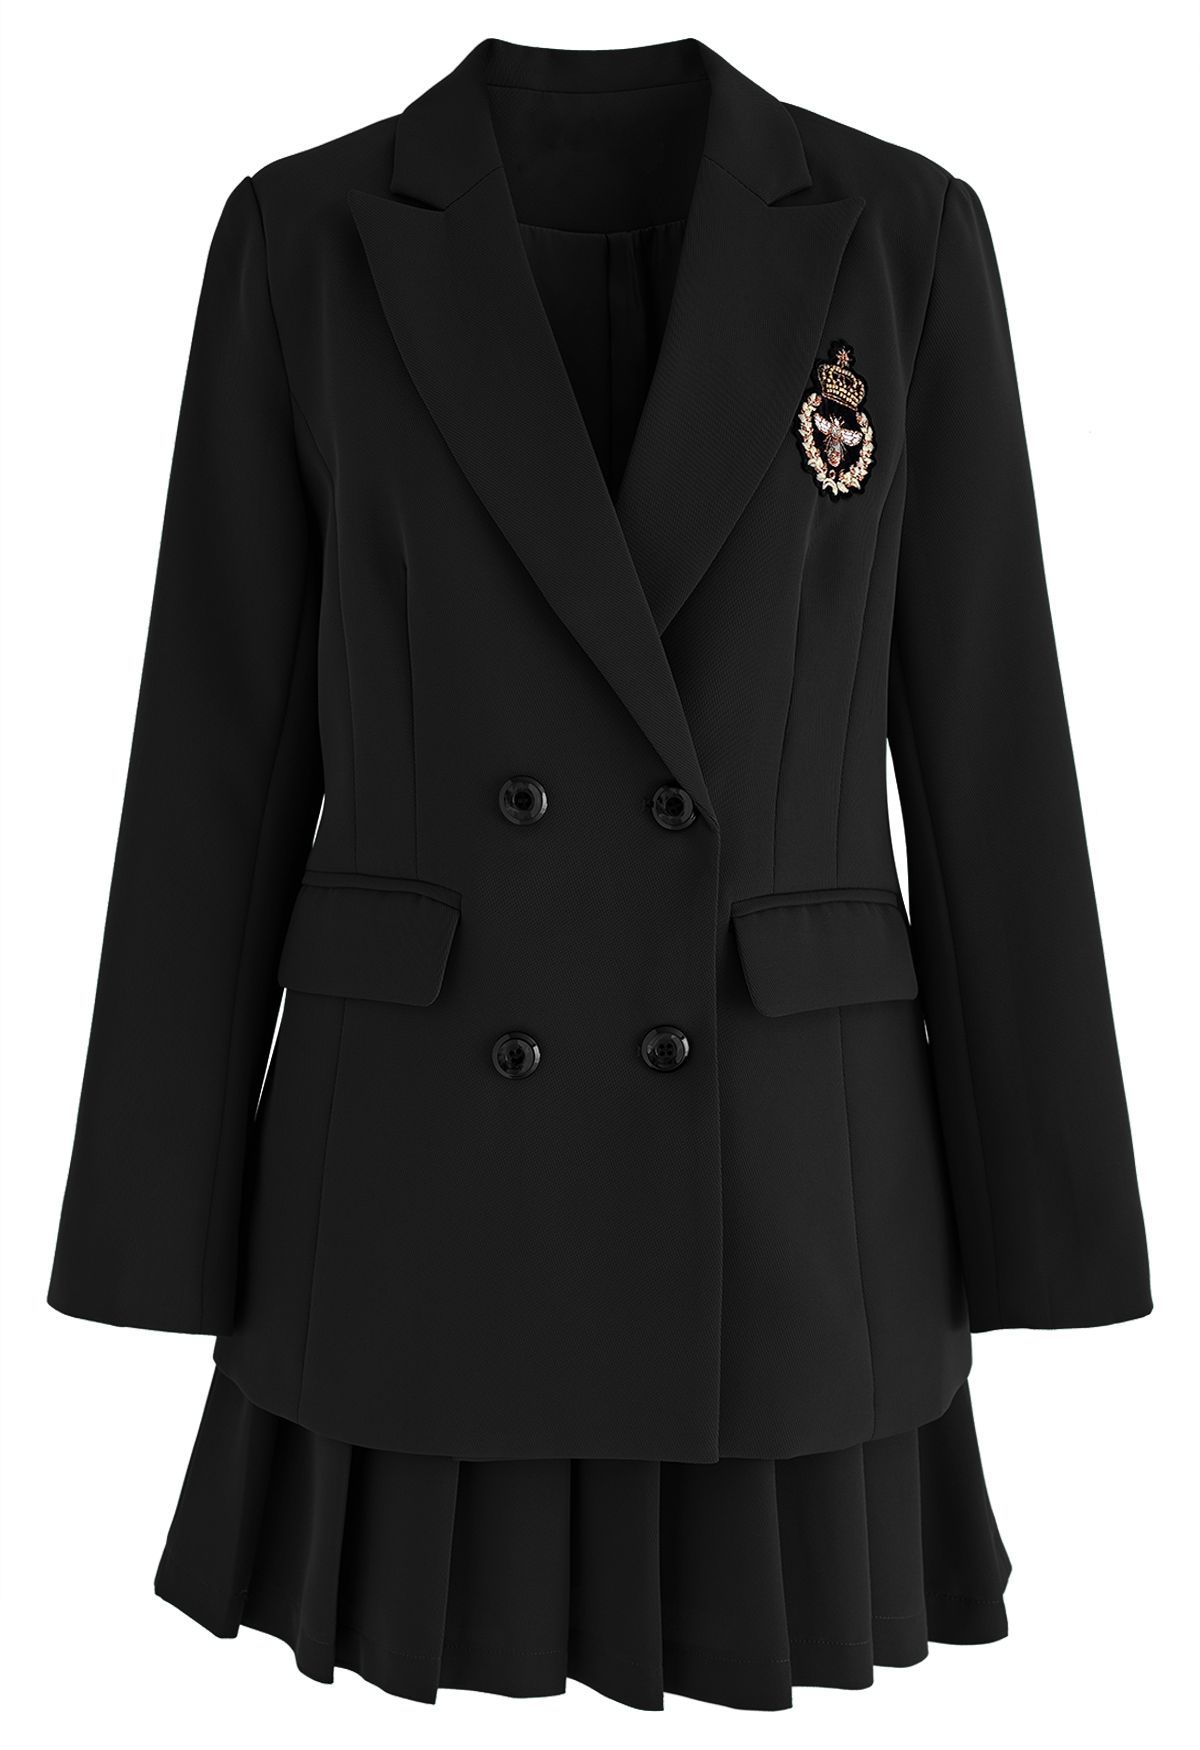 Bee Badge Solid Color Blazer and Skirt Set in Black | Chicwish